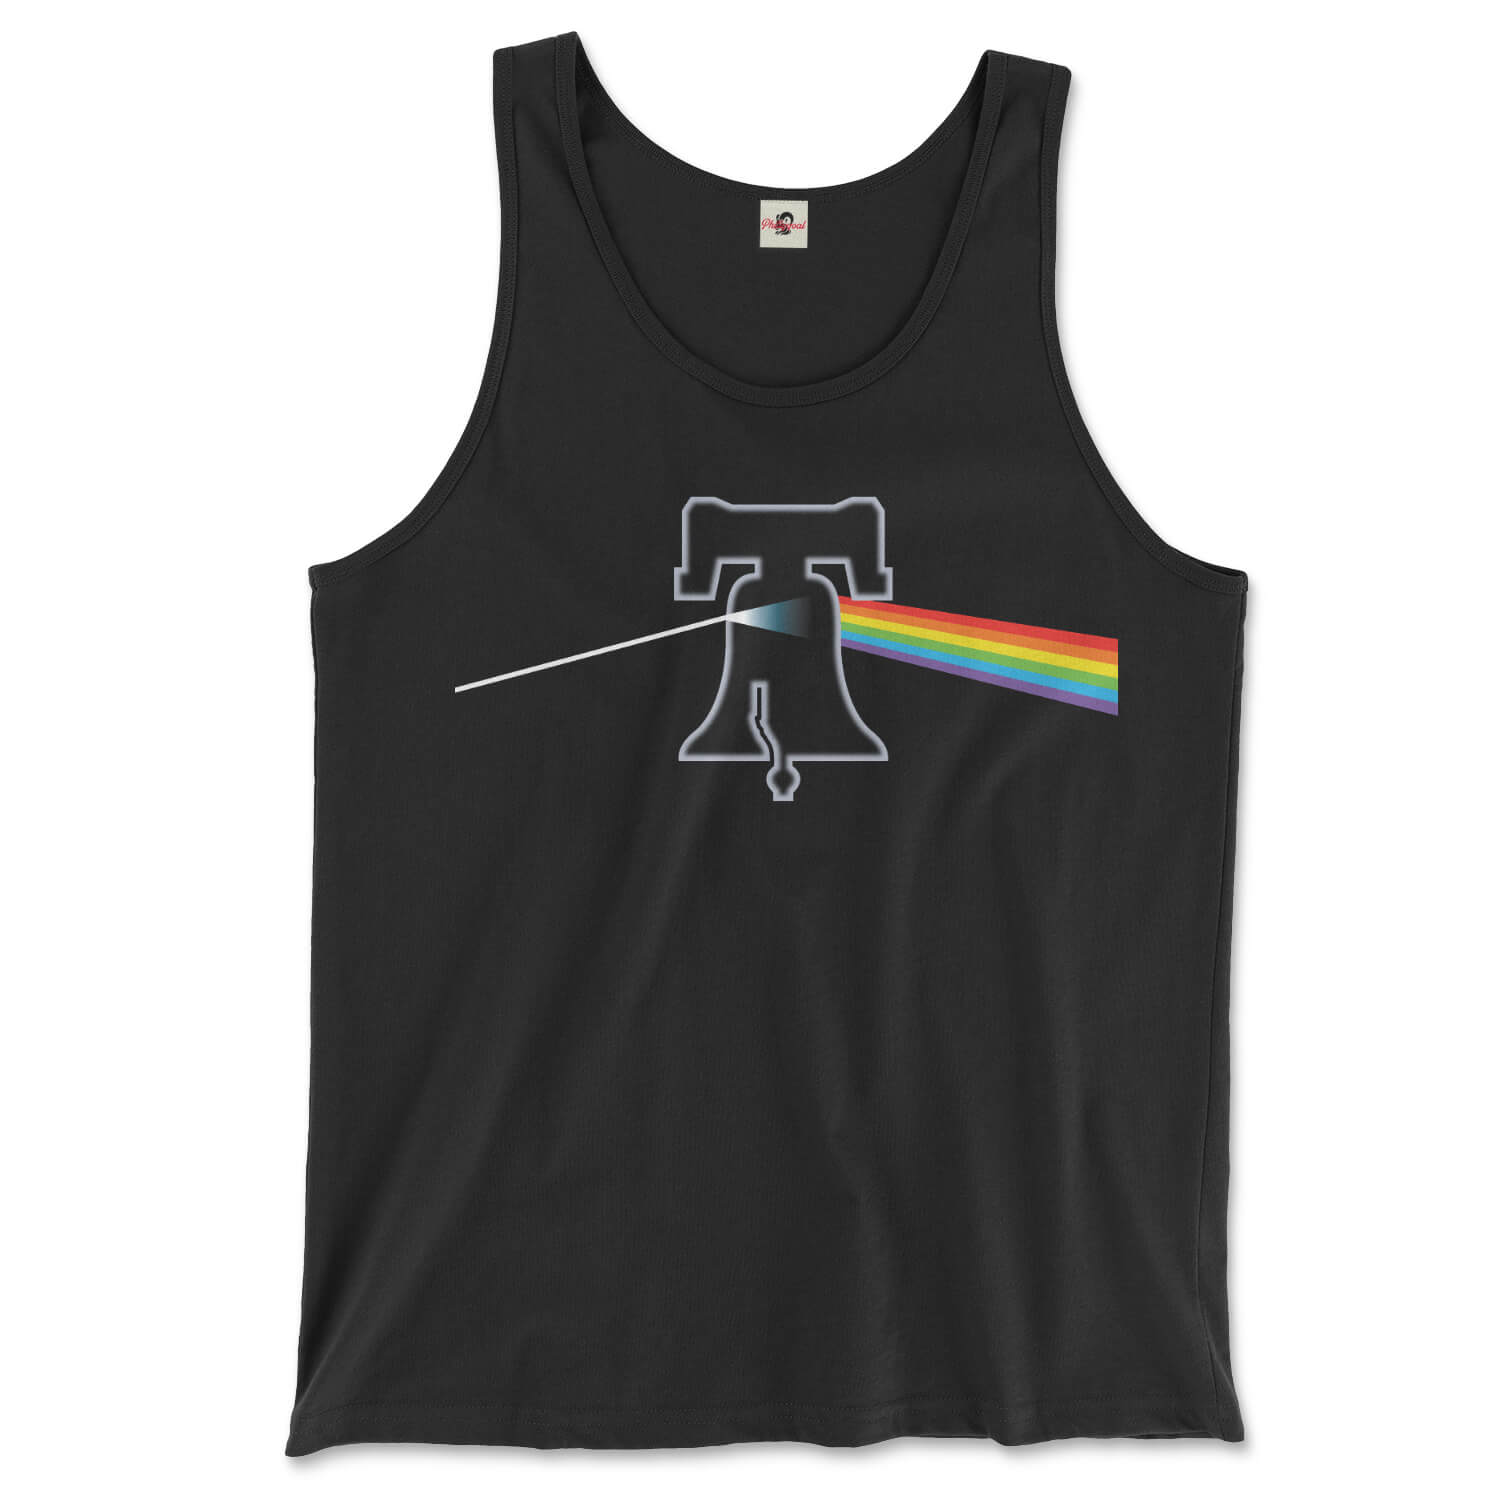 pink floyd philadelphia black phillygoat tank top with liberty bell in dark side of the moon rainbow prism design